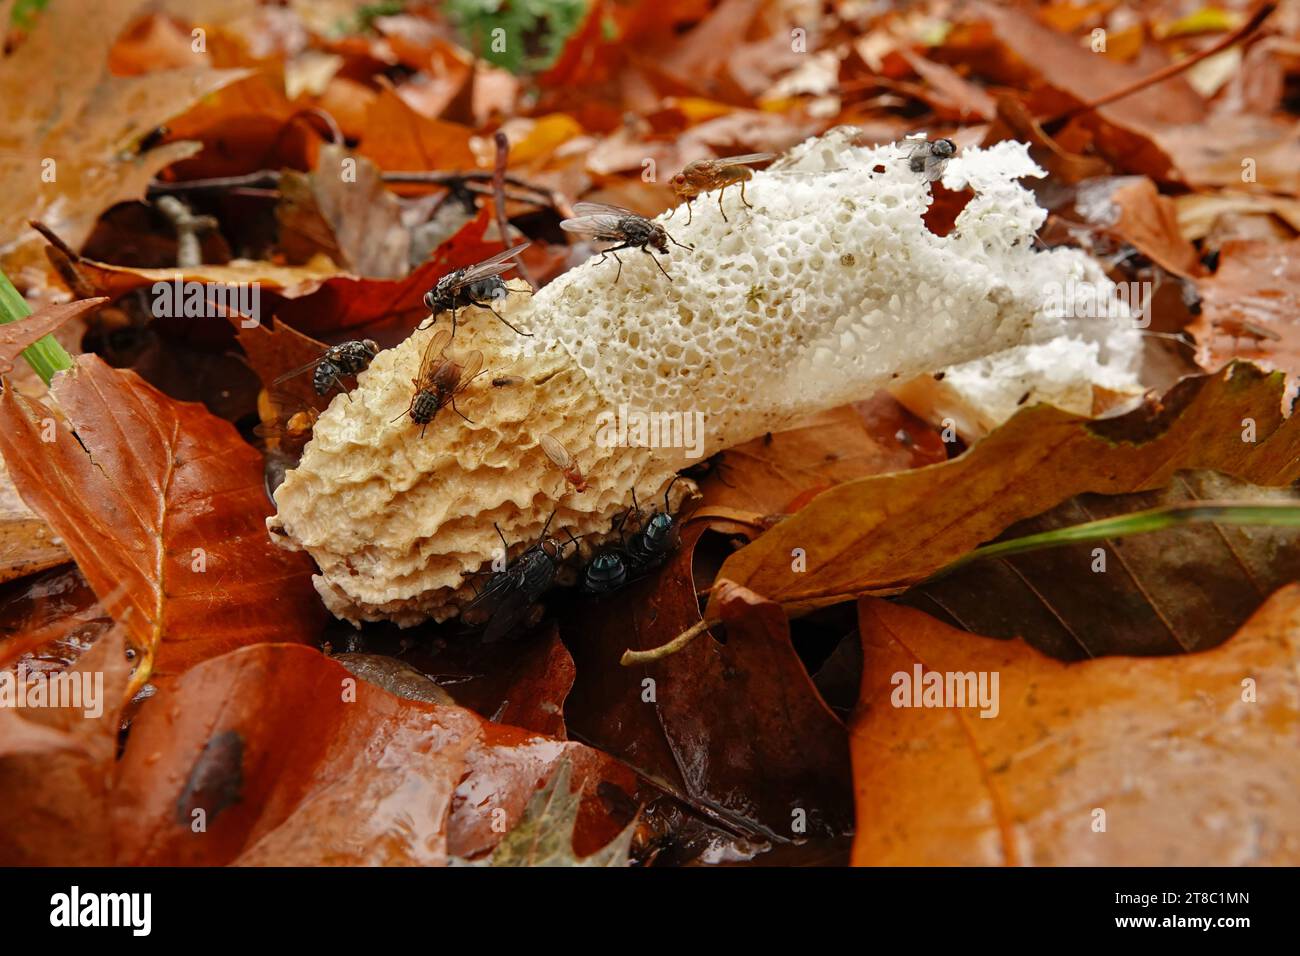 Natural closeup on a common stinkhorn mushroom, Phallus impudicus with various different flies walking on it Stock Photo